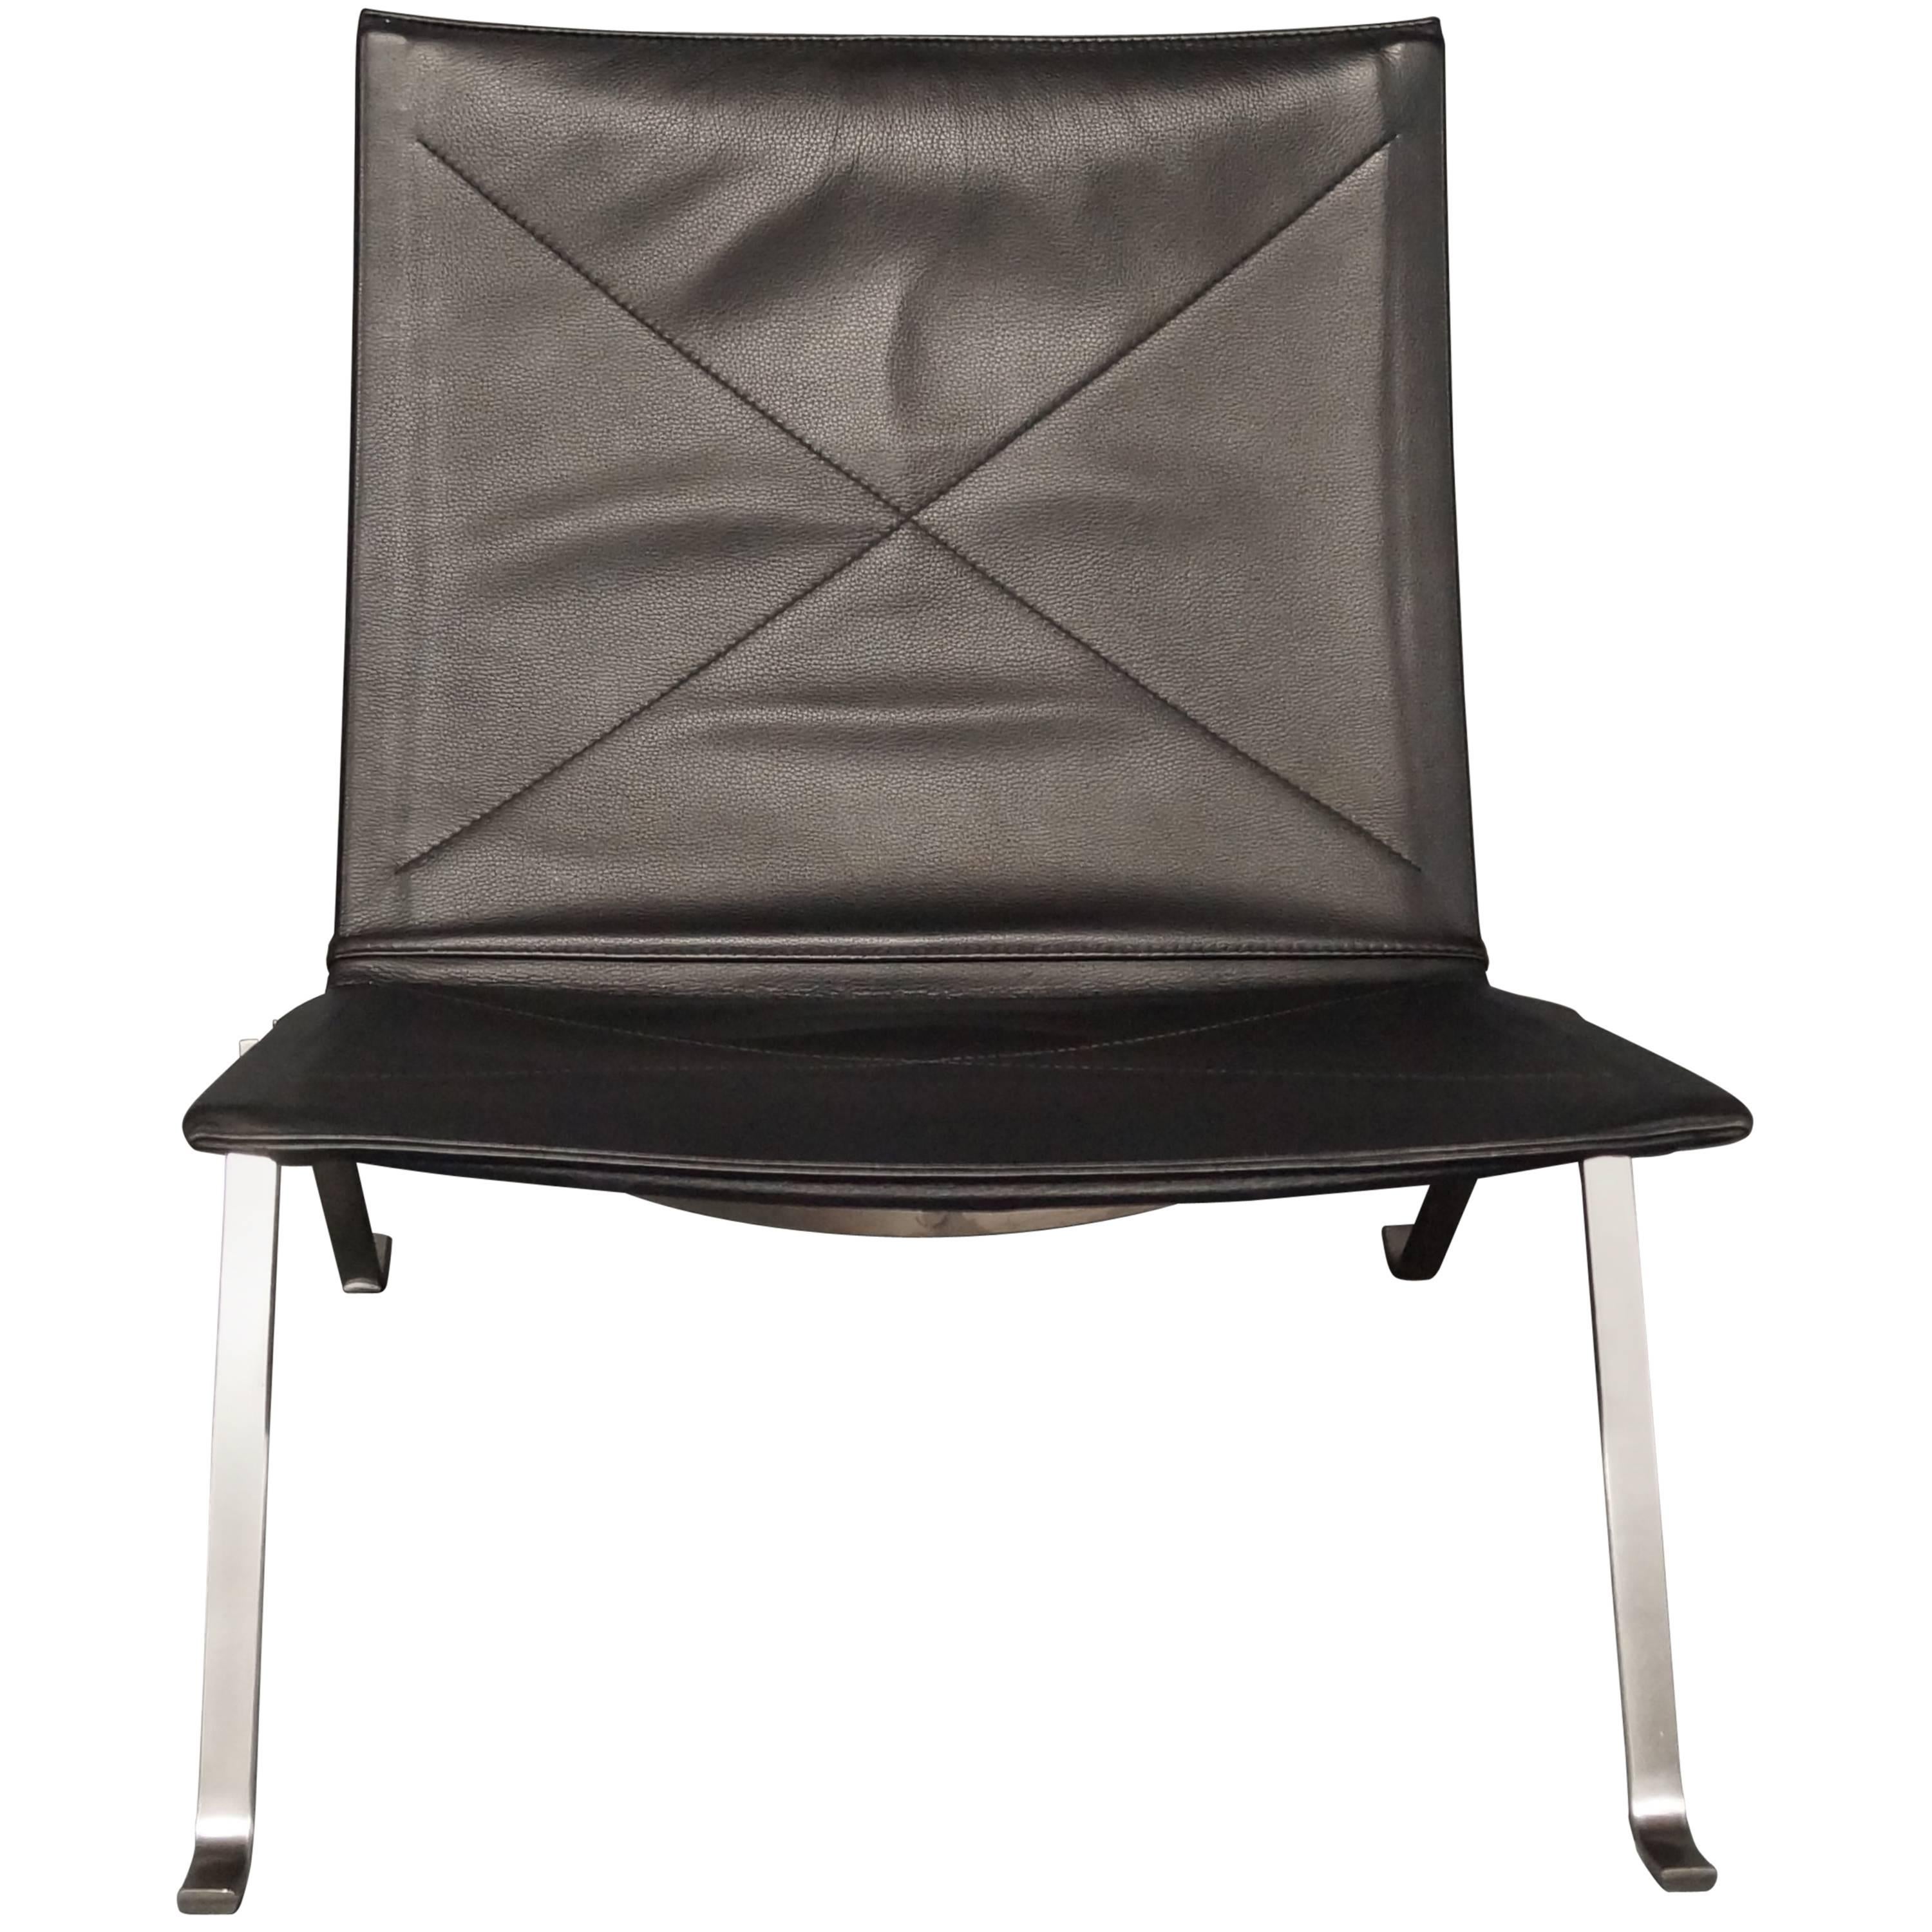 PK22 in Black Classic Leather by Poul Kjaerholm and Fritz Hansen, 2008